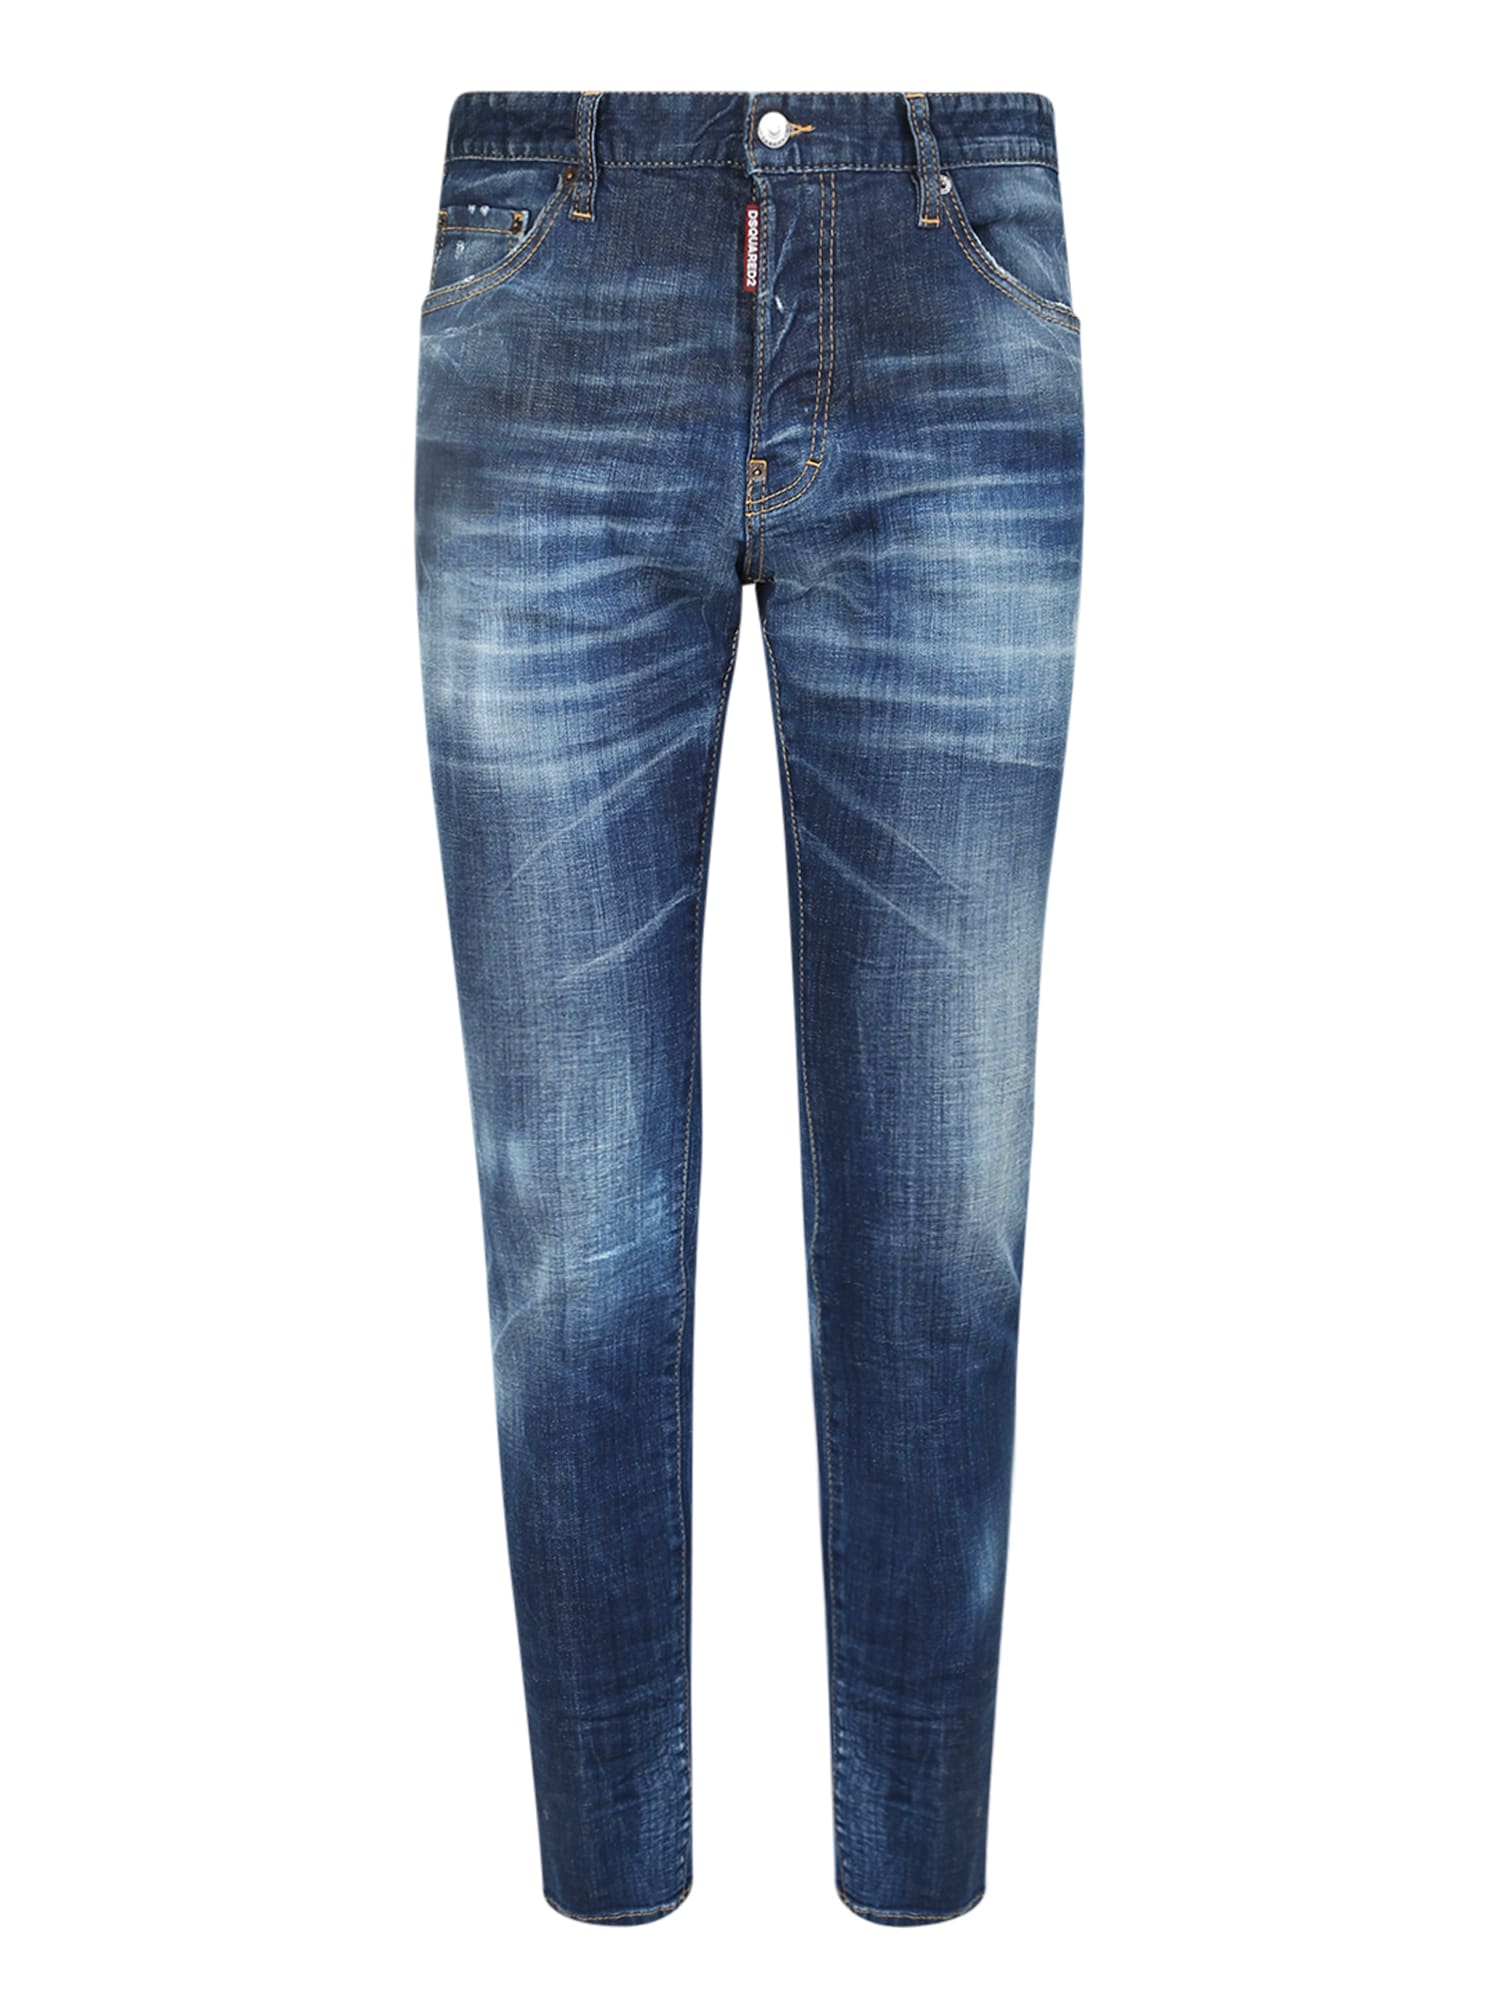 Dsquared2 Denim Garments Are The Strong Point Of The Maison: These Jeans With Ripped Details Are A Must-have